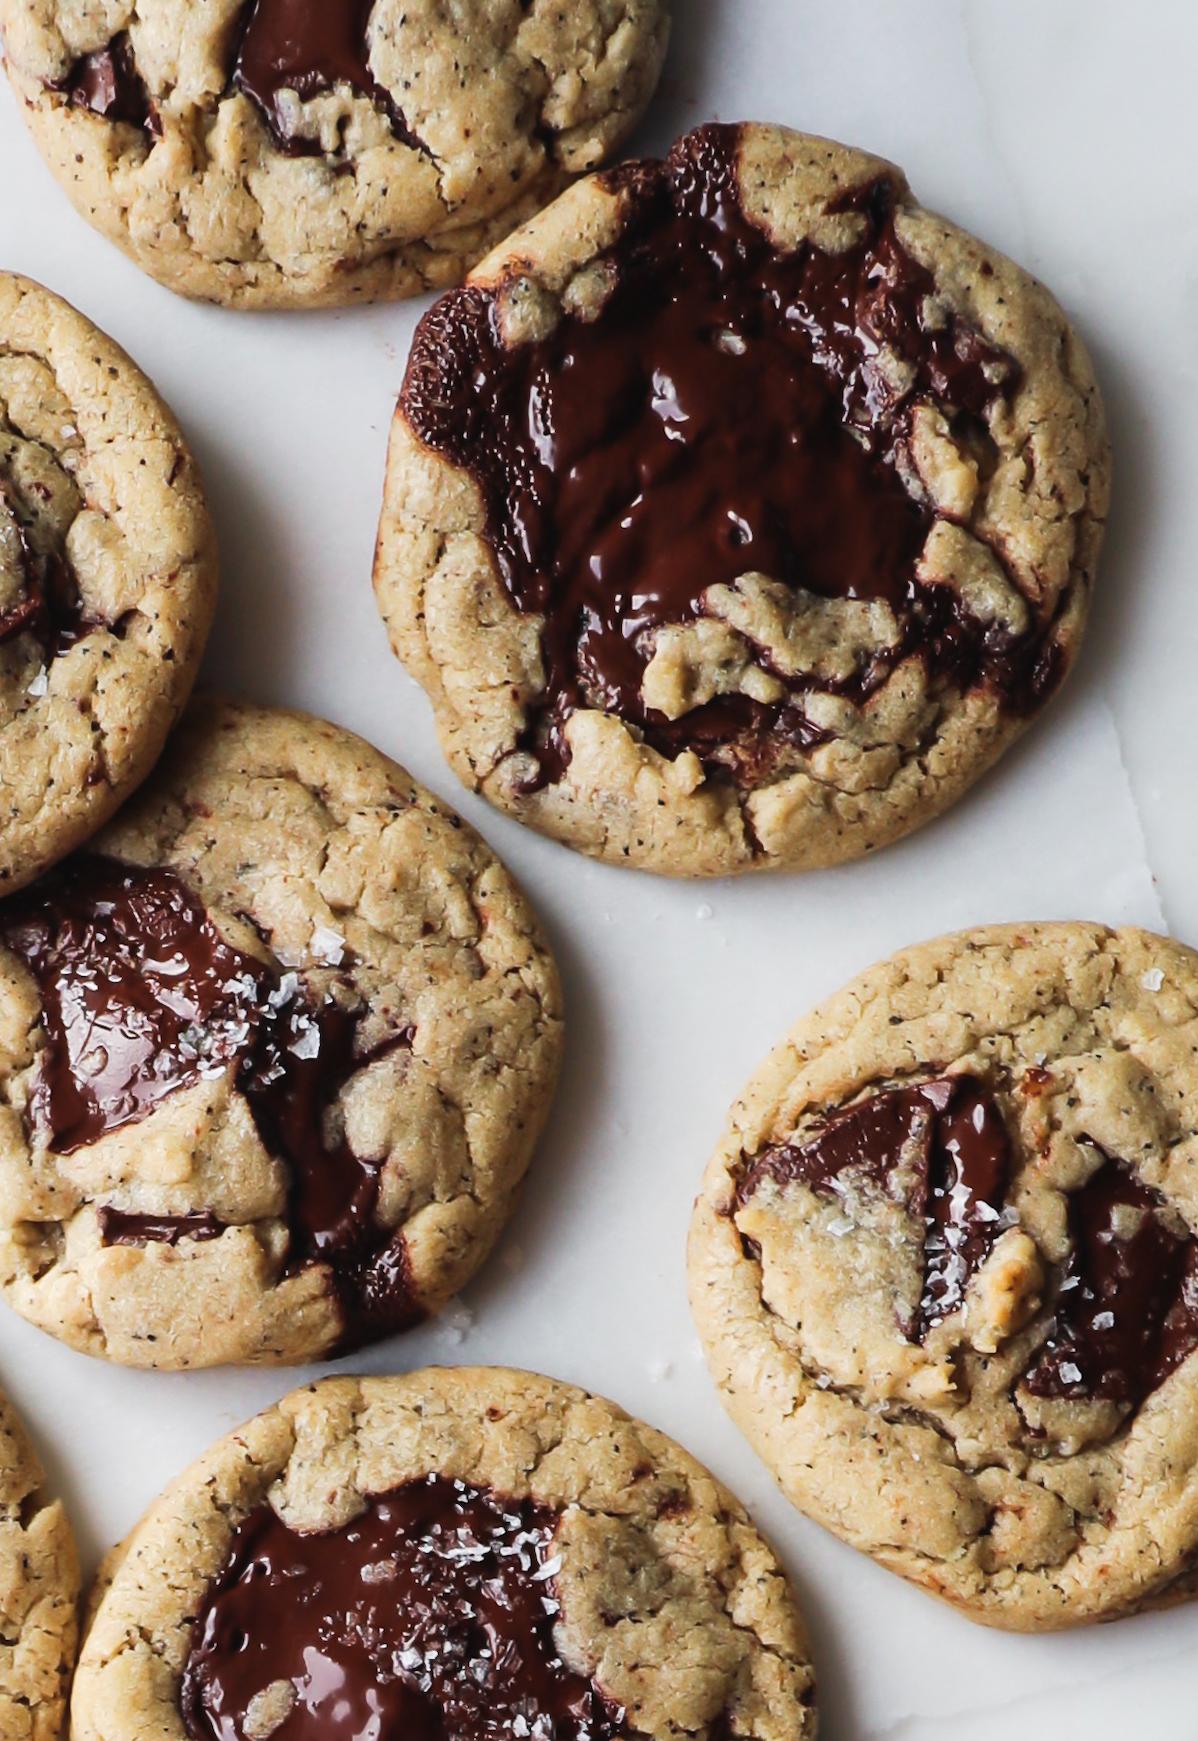  Bring a batch of these Espresso and Chocolate Chip Cookies to any party and watch everyone's eyes light up.